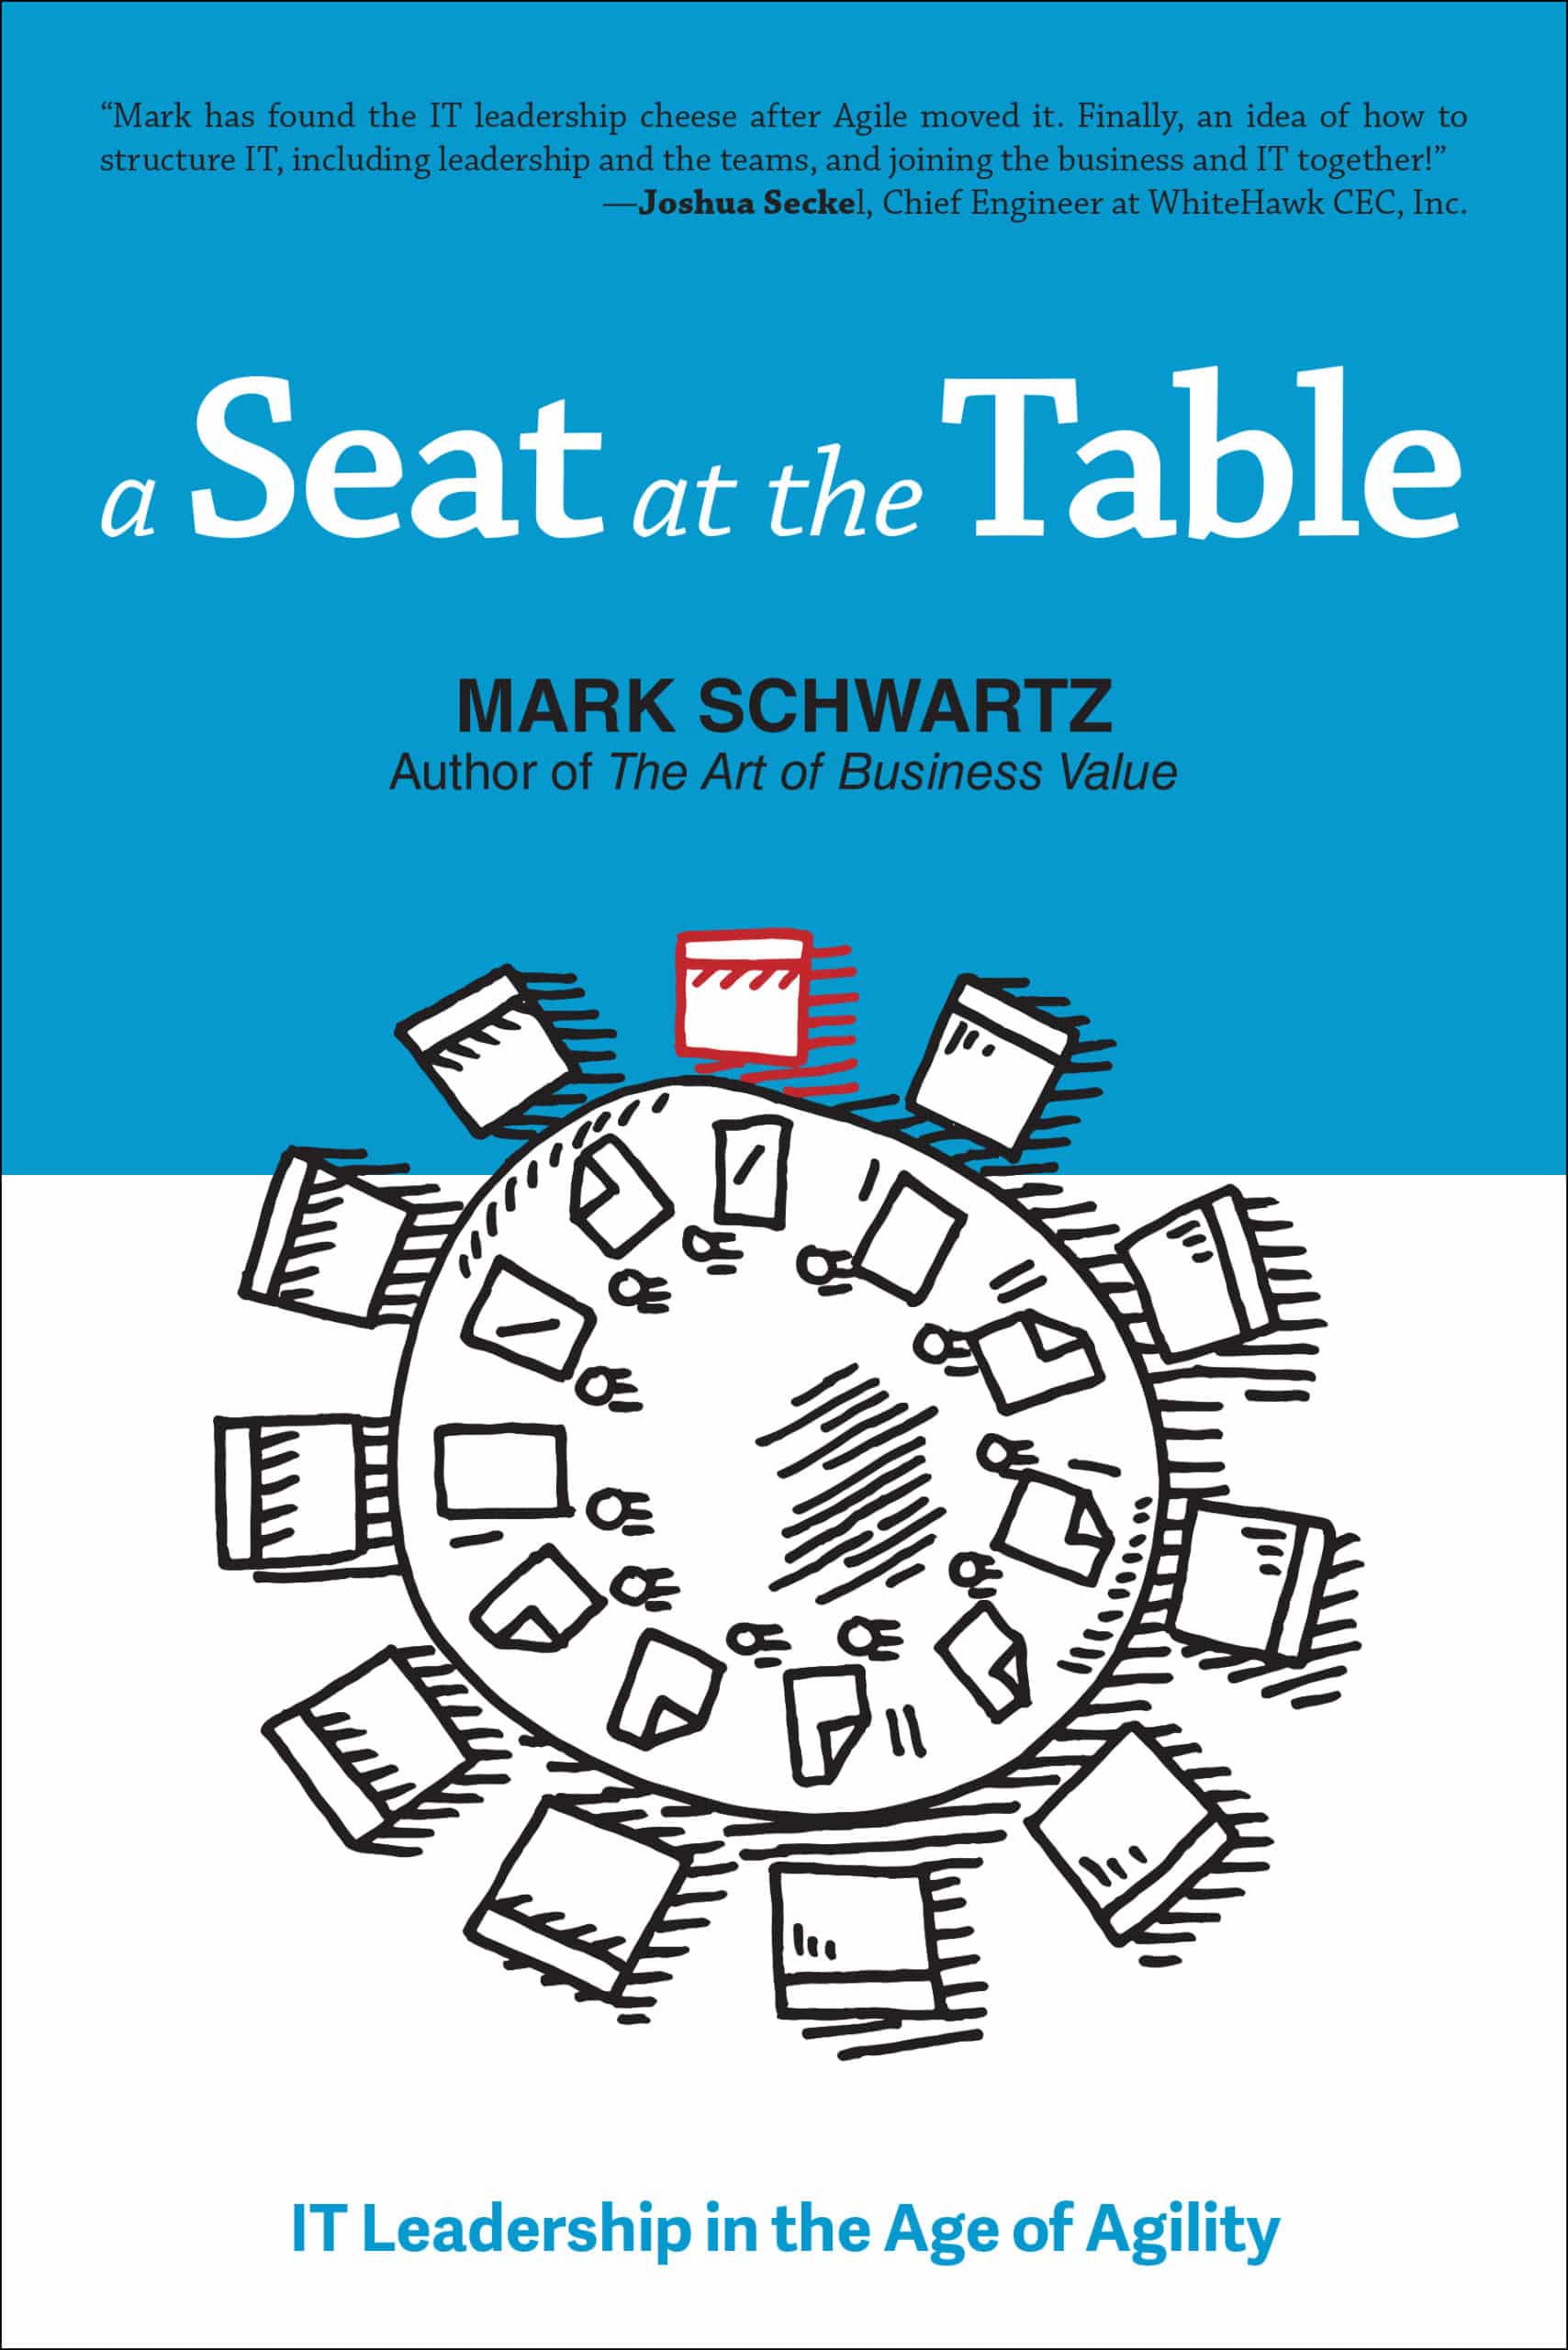 Cover of A Seat at the Table: IT Leadership in the Age of Agility by Mark Schwartz, including how to manage risk in an Agile framework.